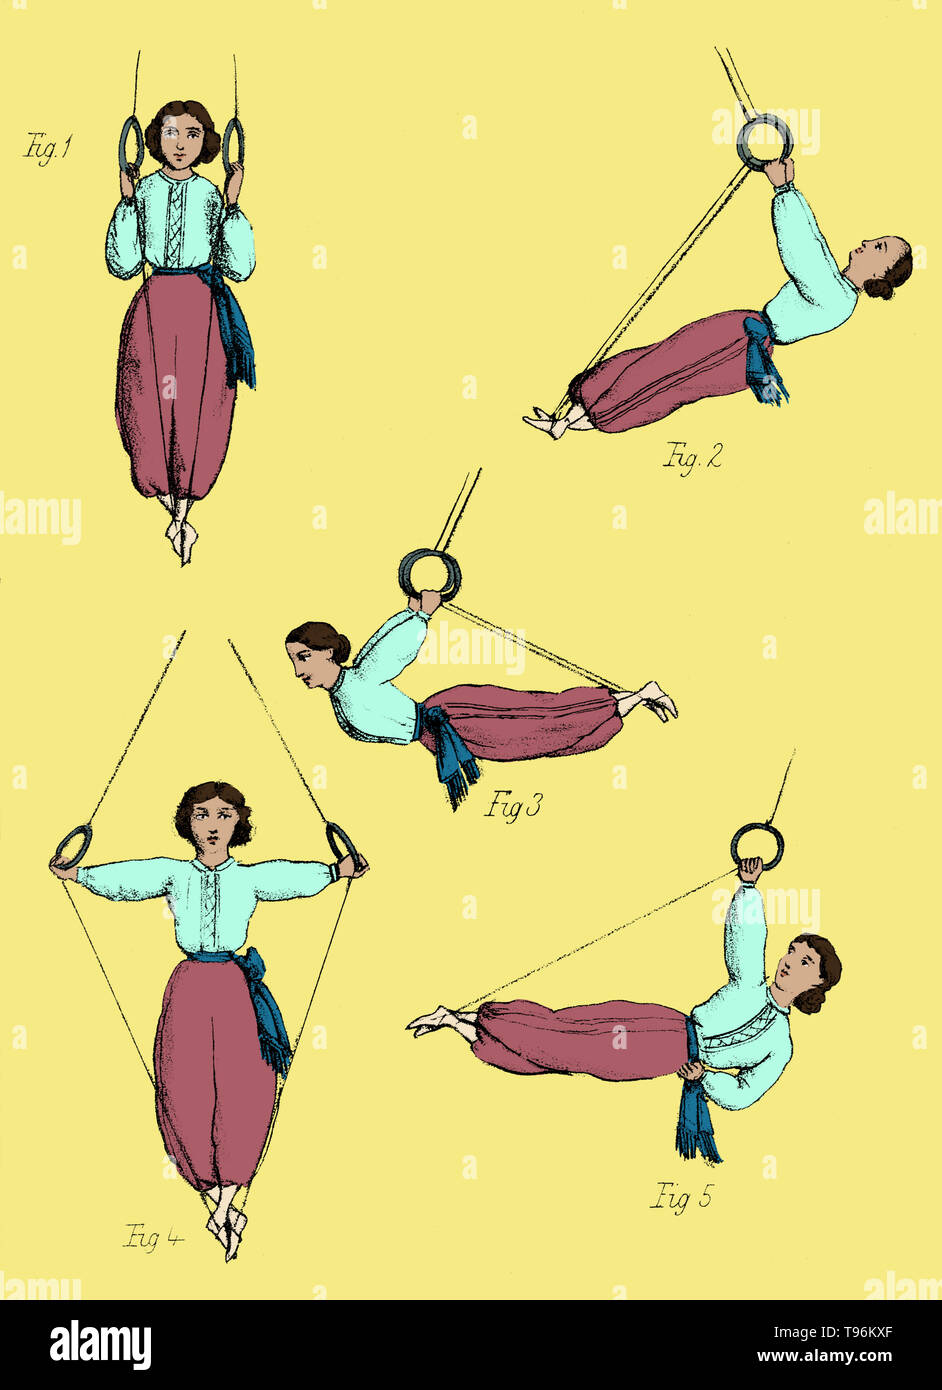 Gymnastics for ladies: a treatise on the science and art of calisthenic and gymnastic exercises by Madame Brenner. The model in this illustration is exercising with Rings. Gymnastics is a sport practiced by men and women that requires balance, strength, flexibility, agility, coordination, endurance and control. The movements involved in gymnastics contribute to the development of the arms, legs, shoulders, back, chest and abdominal muscle groups. Alertness, precision, daring, self-confidence and self-discipline are mental traits that can also be developed through gymnastics. Stock Photo